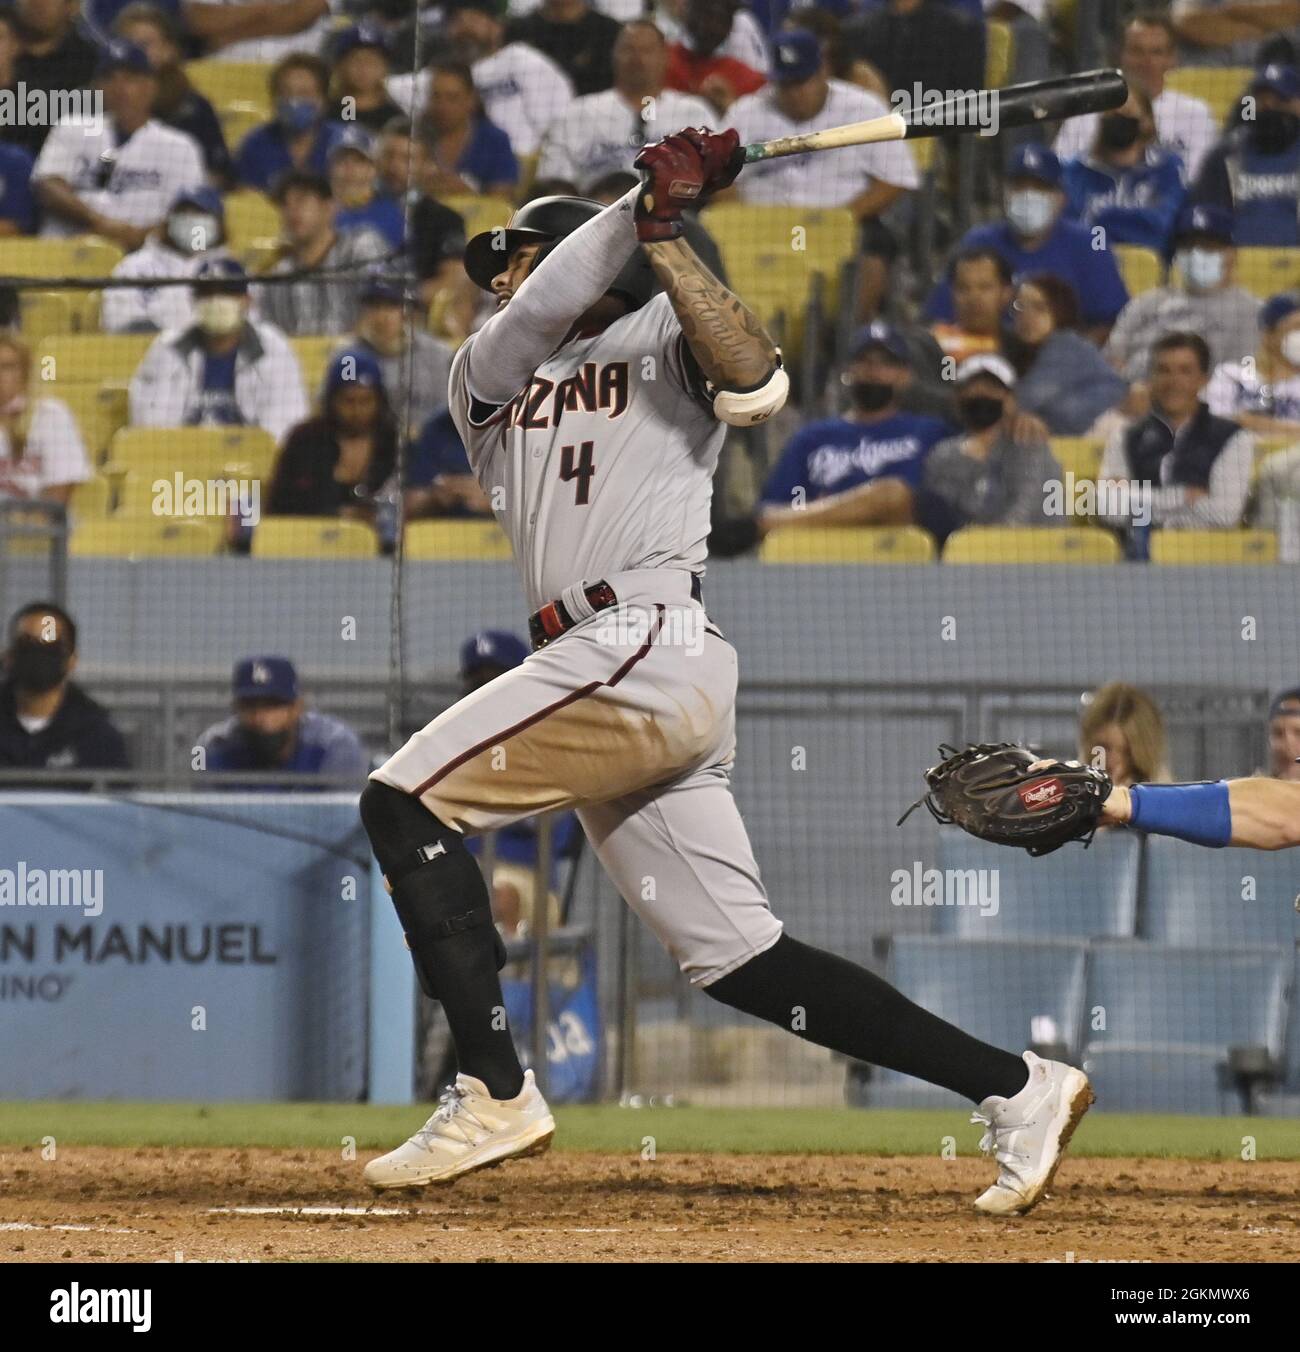 Los Angeles, United States. 15th Sep, 2021. Arizona Diamondbacks' Ketel Marte hits a three-run home run in the seventh off Los Angeles Dodgers' reliever Justin Bruihi at Dodger Stadium in Los Angeles on Tuesday, September 14, 2021. Marte's 12th home run of the season was the first home run Bruihl has given up at the major-league level. Photo by Jim Ruymen/UPI Credit: UPI/Alamy Live News Stock Photo